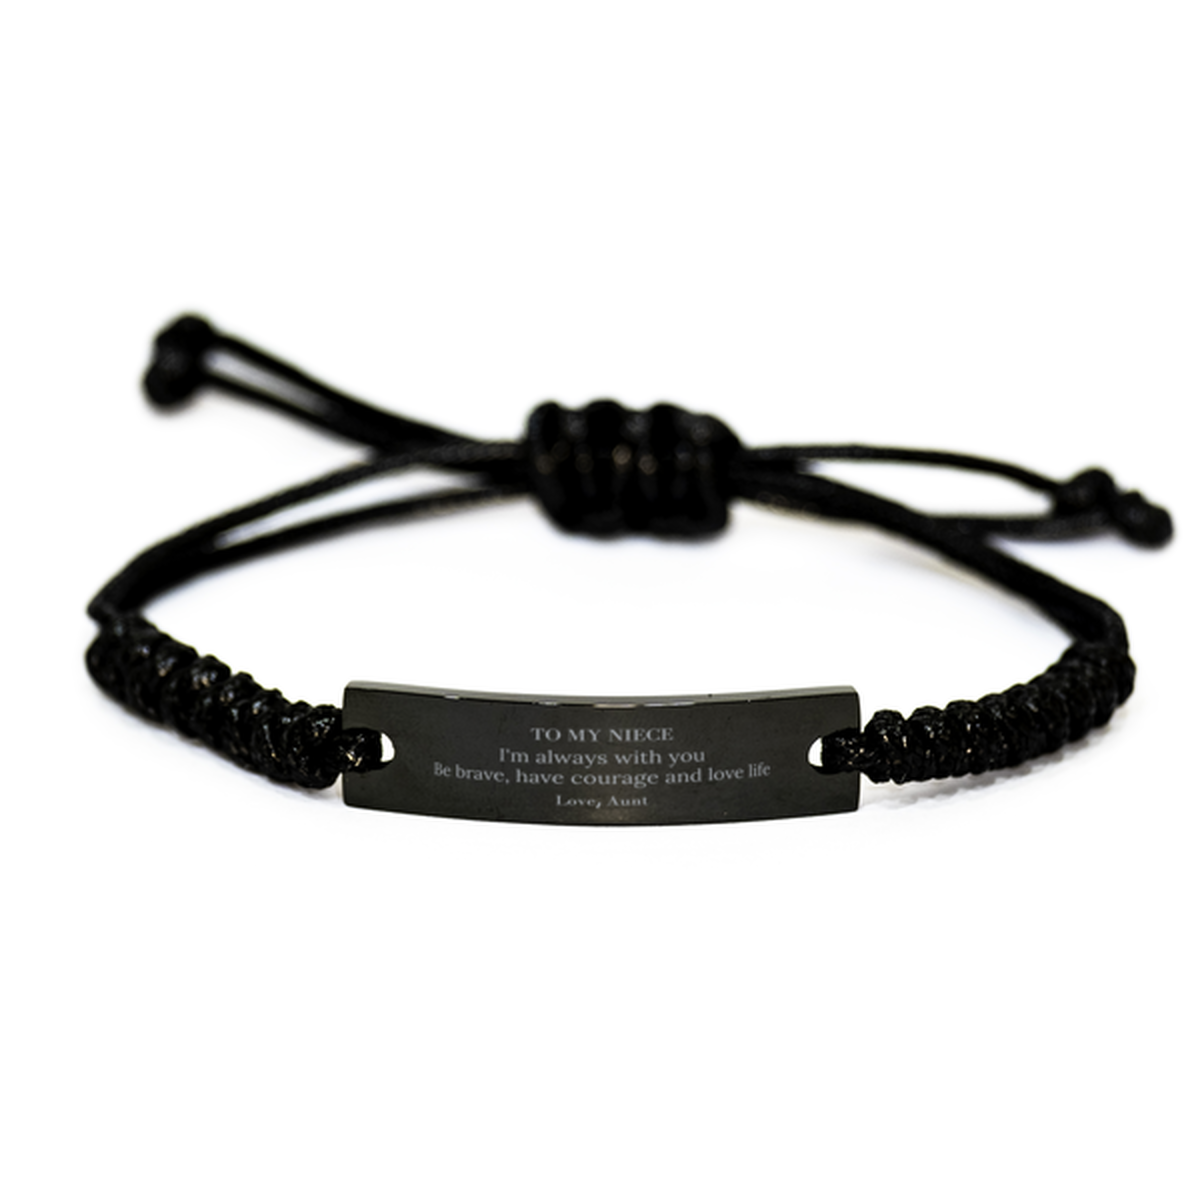 To My Niece Gifts from Aunt, Unique Black Rope Bracelet Inspirational Christmas Birthday Graduation Gifts for Niece I'm always with you. Be brave, have courage and love life. Love, Aunt